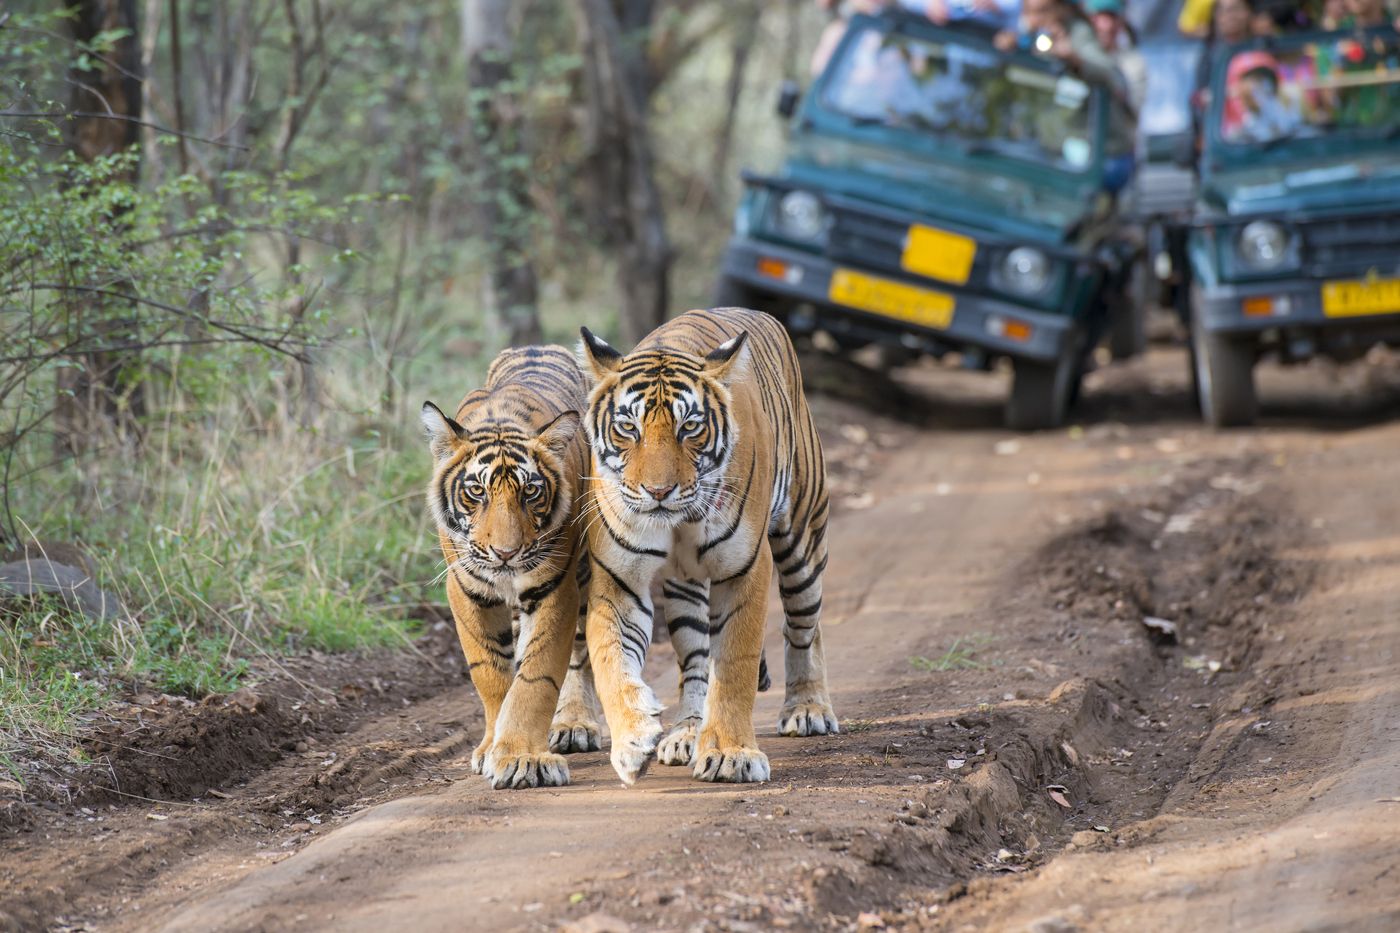 A tigress and her cub are admired by tourists on a safari. Although critically endangered species, in 2019 the number of tigers has increased from 2226 (in 2014) to 2,900